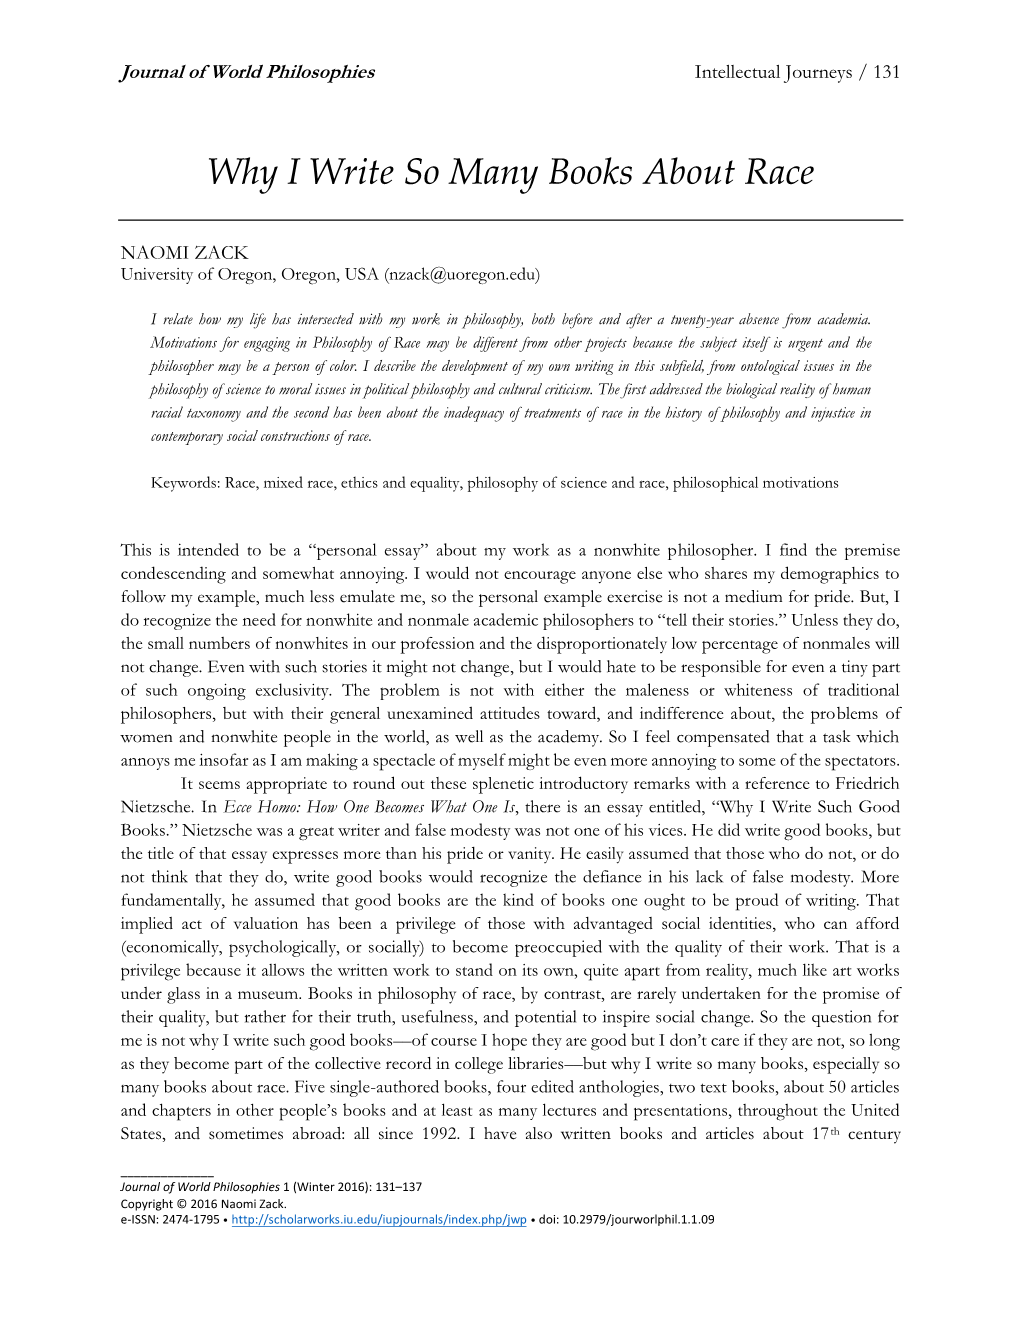 Why I Write So Many Books About Race